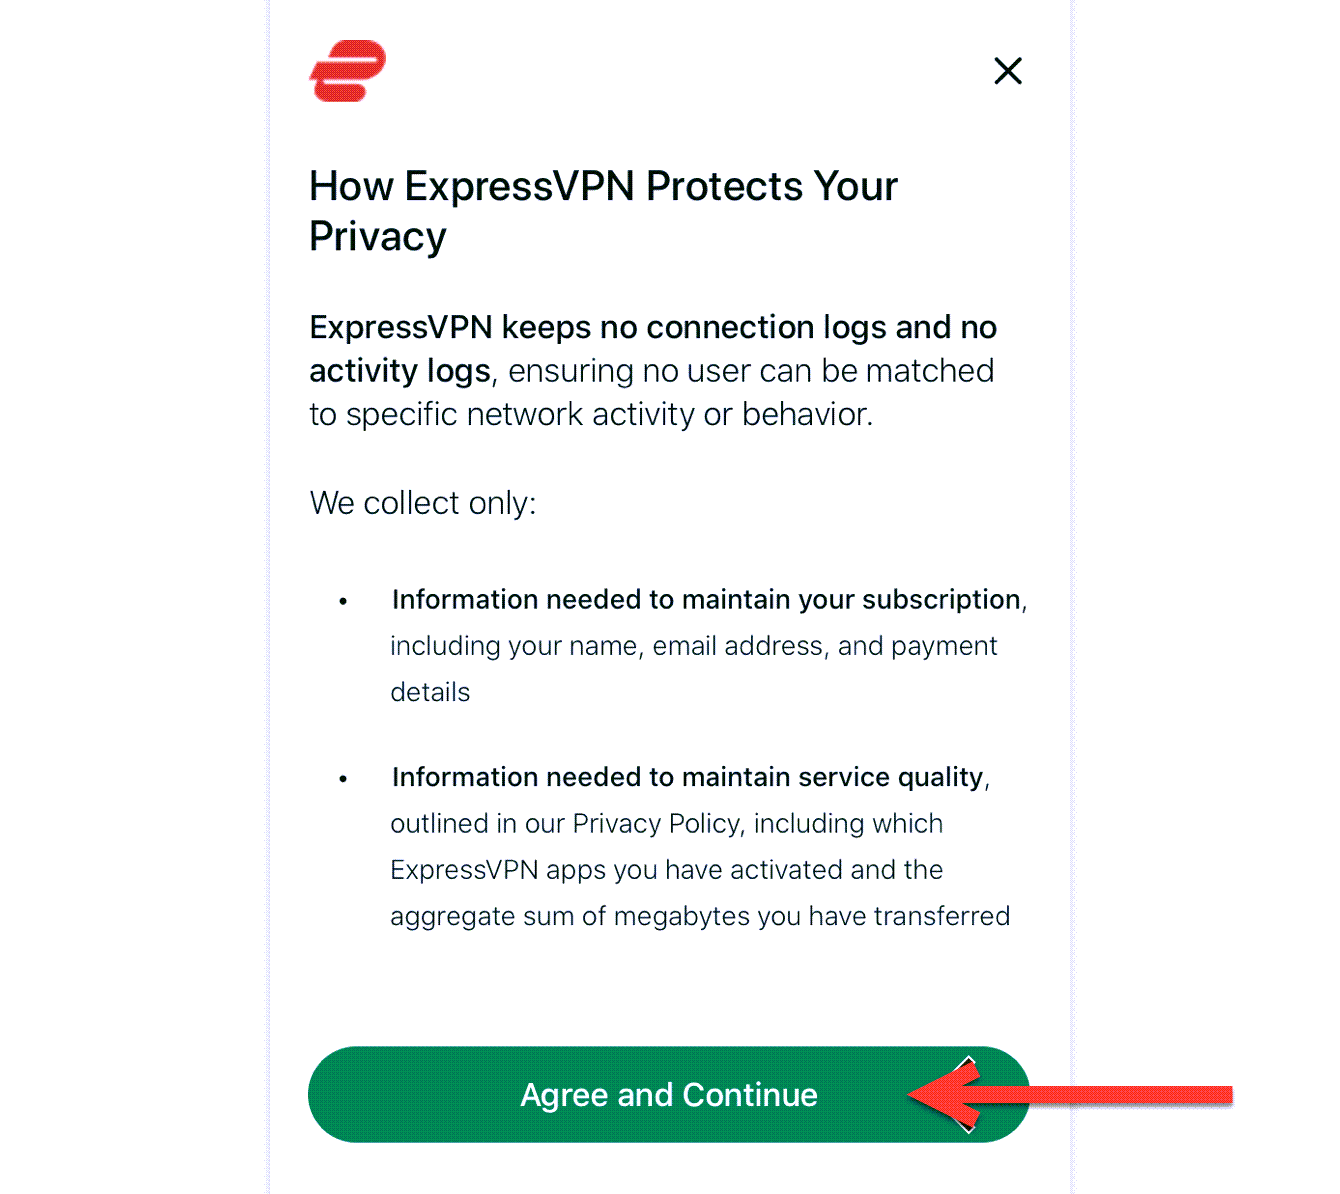 expressvpn-ios-10.0.0-protect-your-privacy-tap-agree-and-continue-in-France